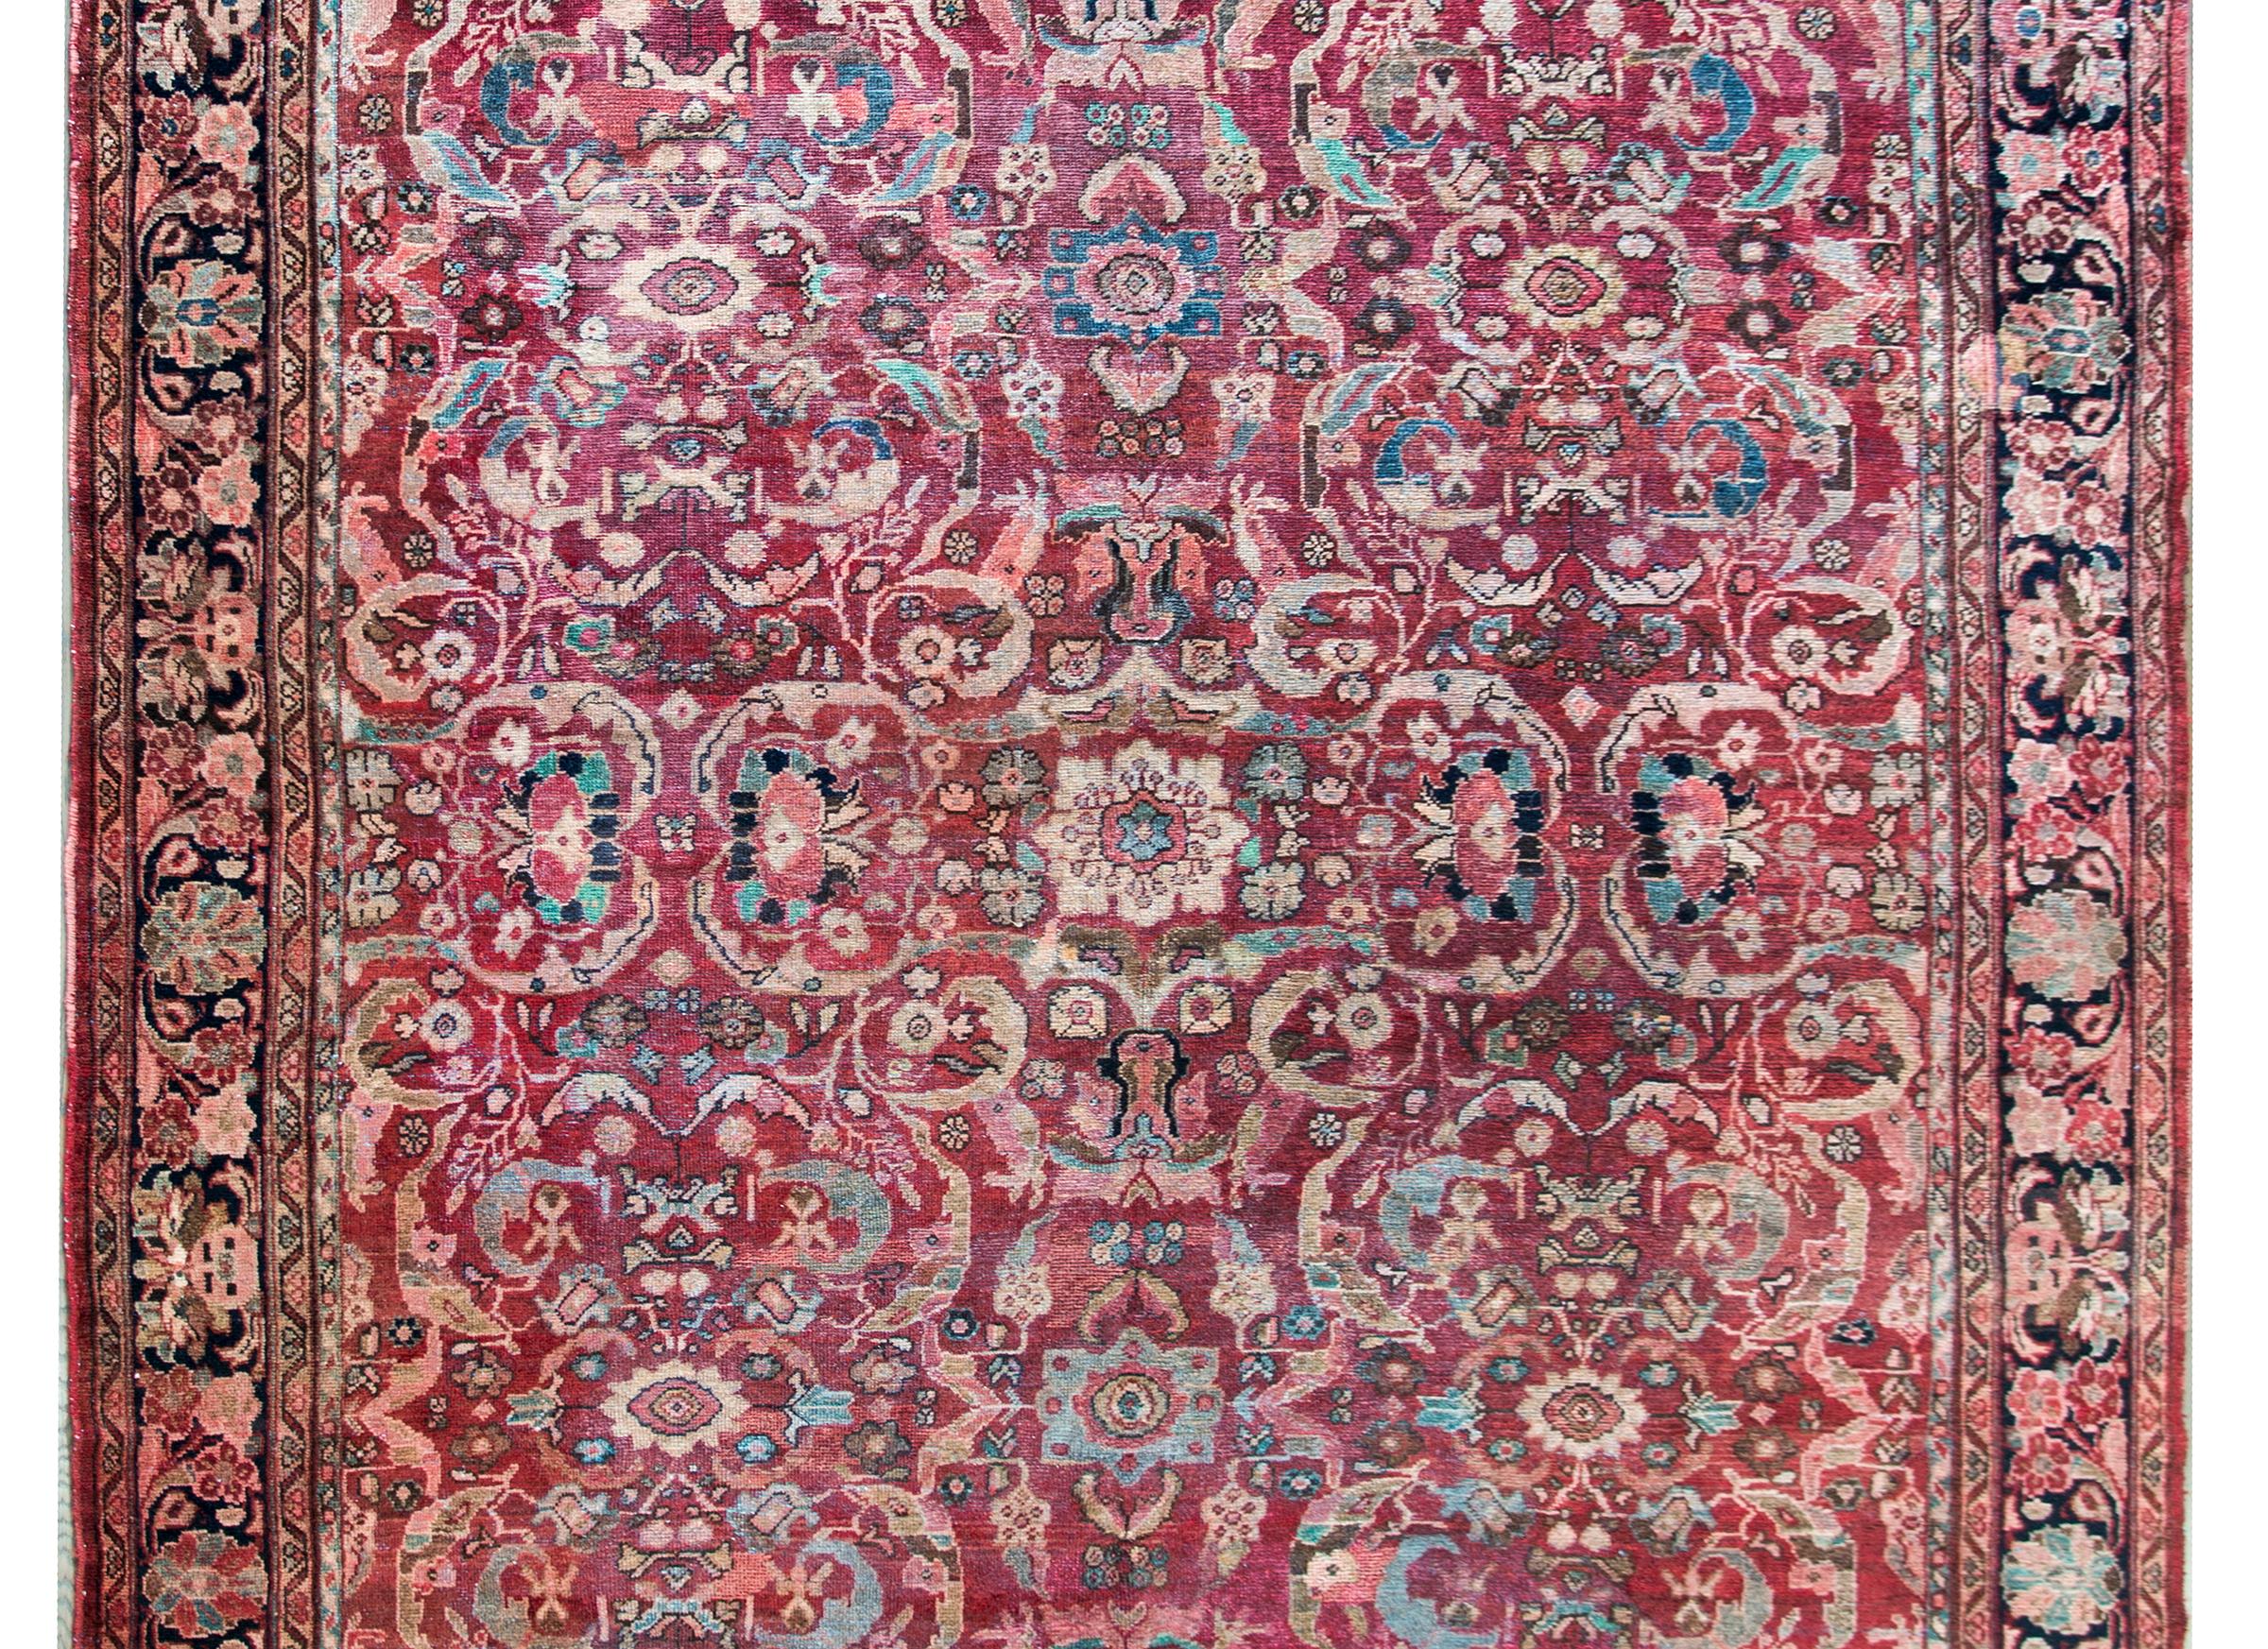 A gorgeous early 20th century Persian Mahal rug with the most incredible mirrored trellis floral pattern woven in cream, brown, pink, and indigo set against a cranberry background, and framed by a complex border with a wide central large-scale